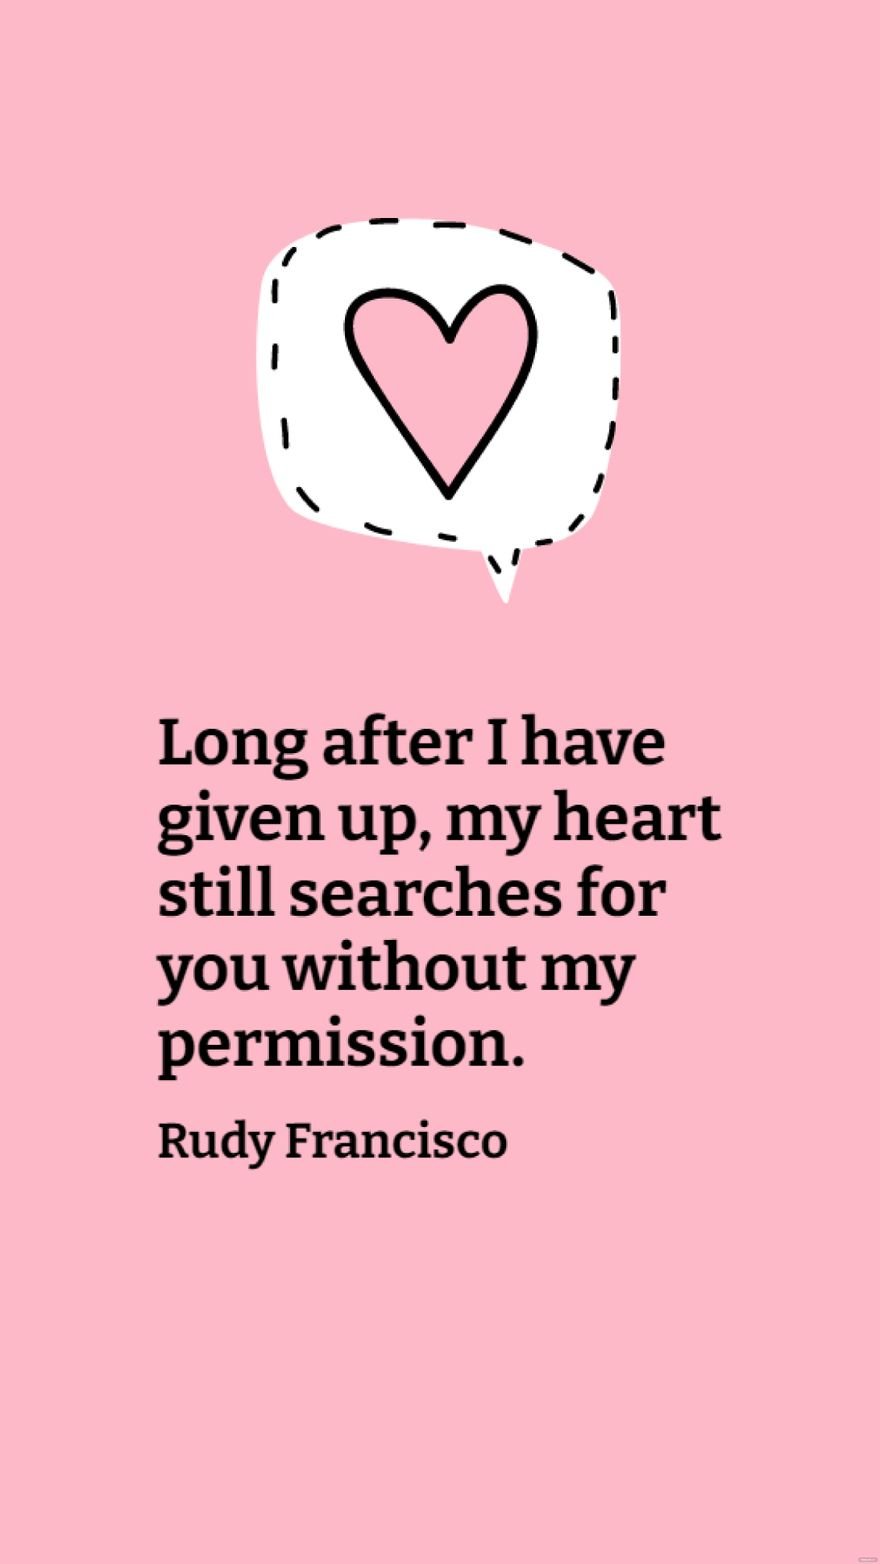 Rudy Francisco - Long after I have given up, my heart still searches for you without my permission. in JPG